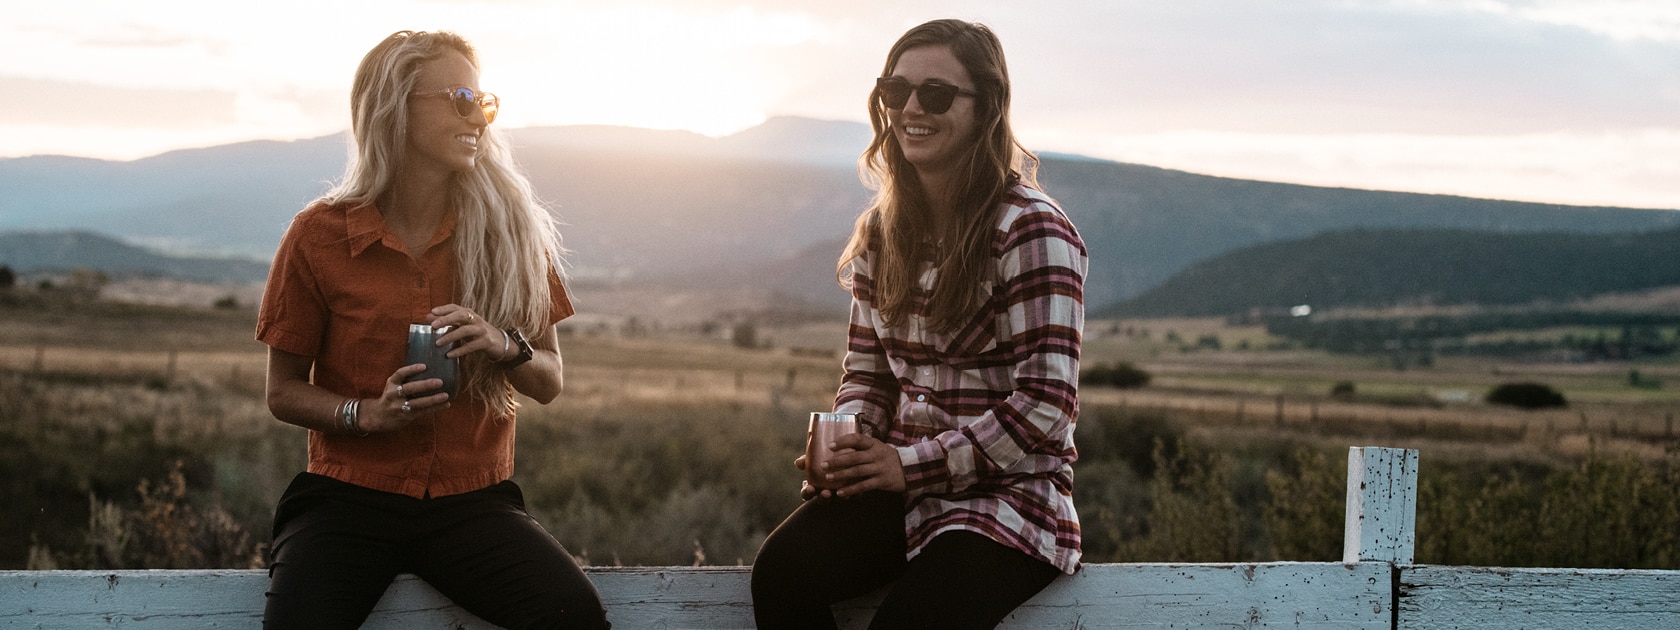 two women holding drinks sit on a white fence while the sun sets over the mountains behind them